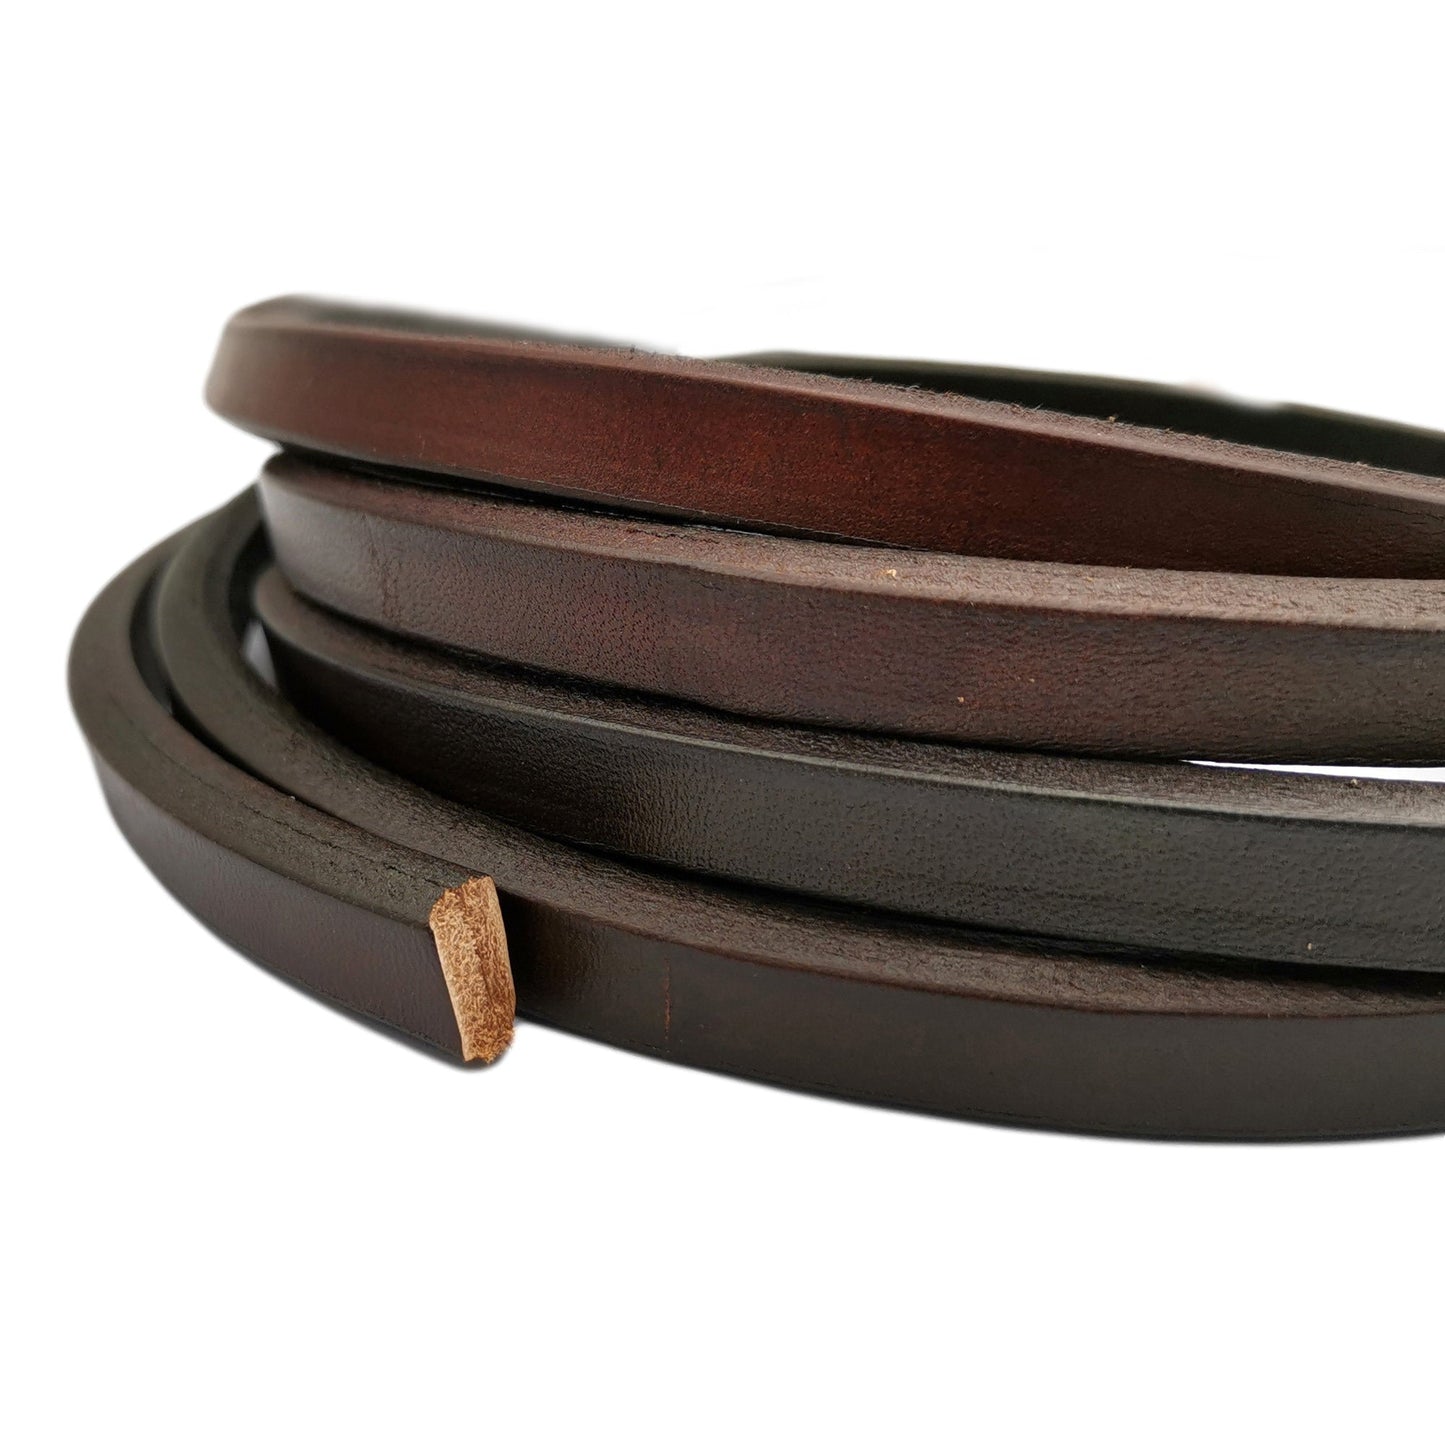 shapesbyX-1 Yard 10mm Brown Licorice Leather Cords 10mmx6mm Leather Bangle Bracelet Making 10x6mm